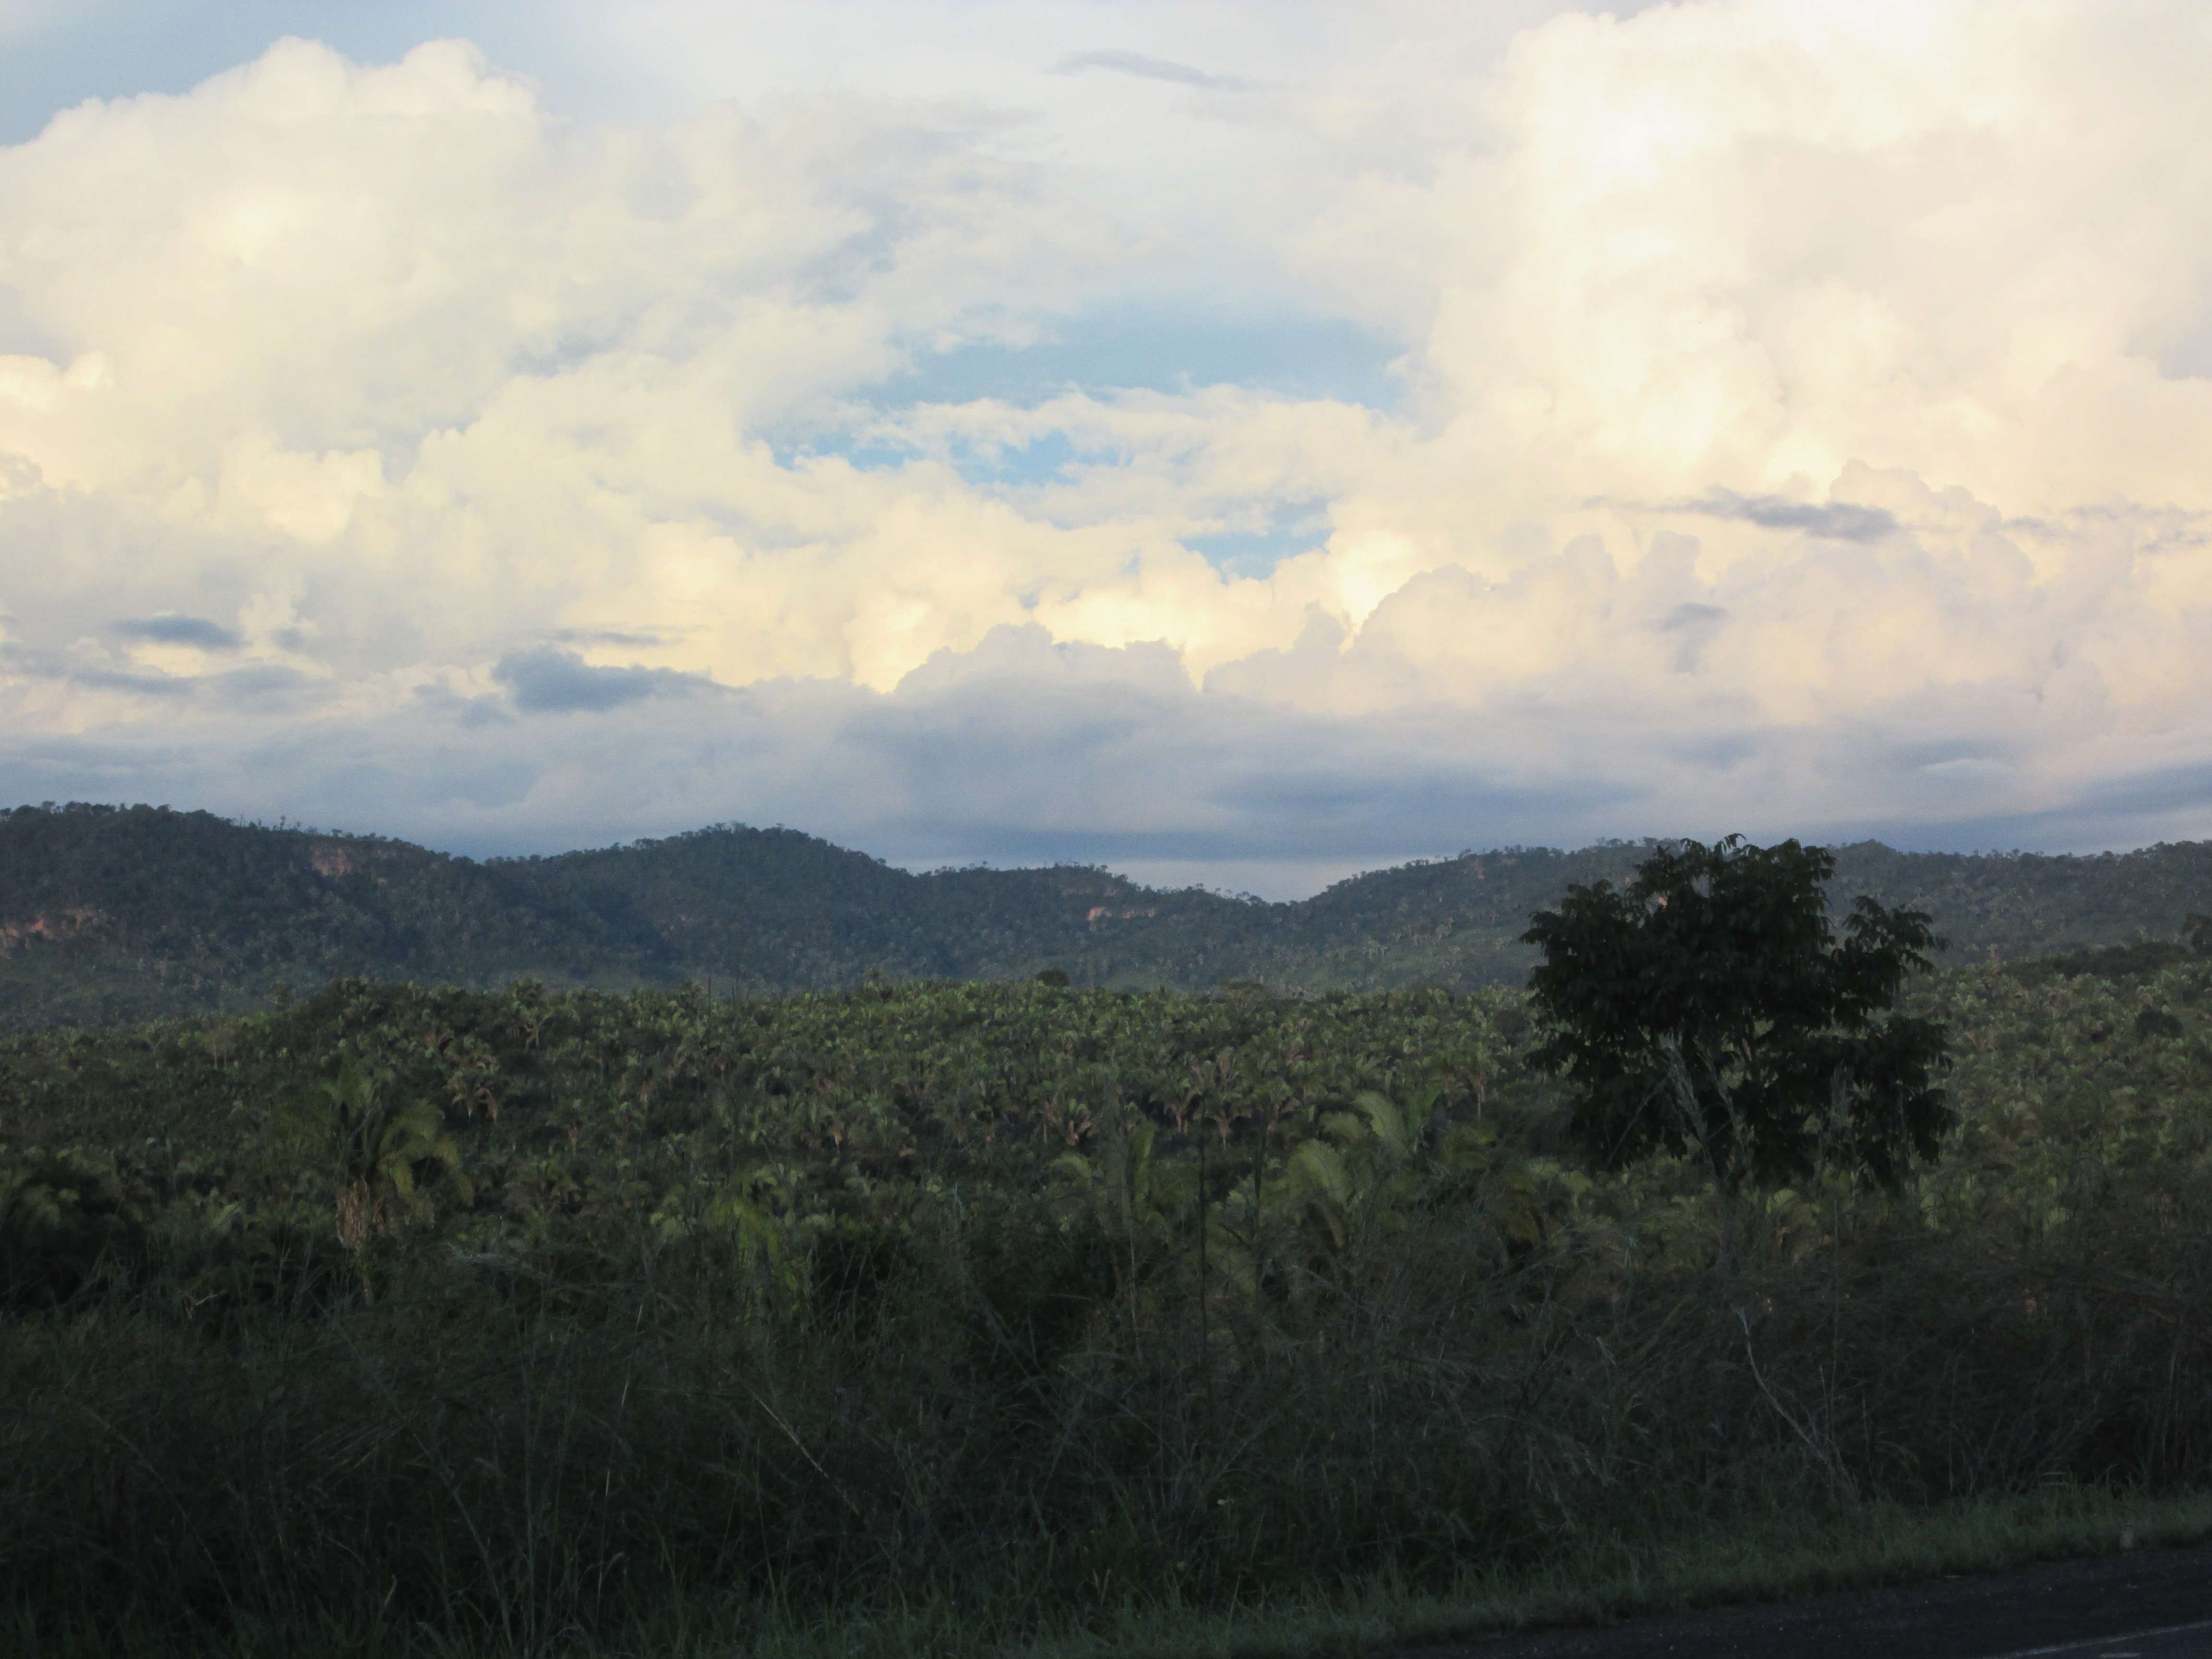 View of the jungle from a car